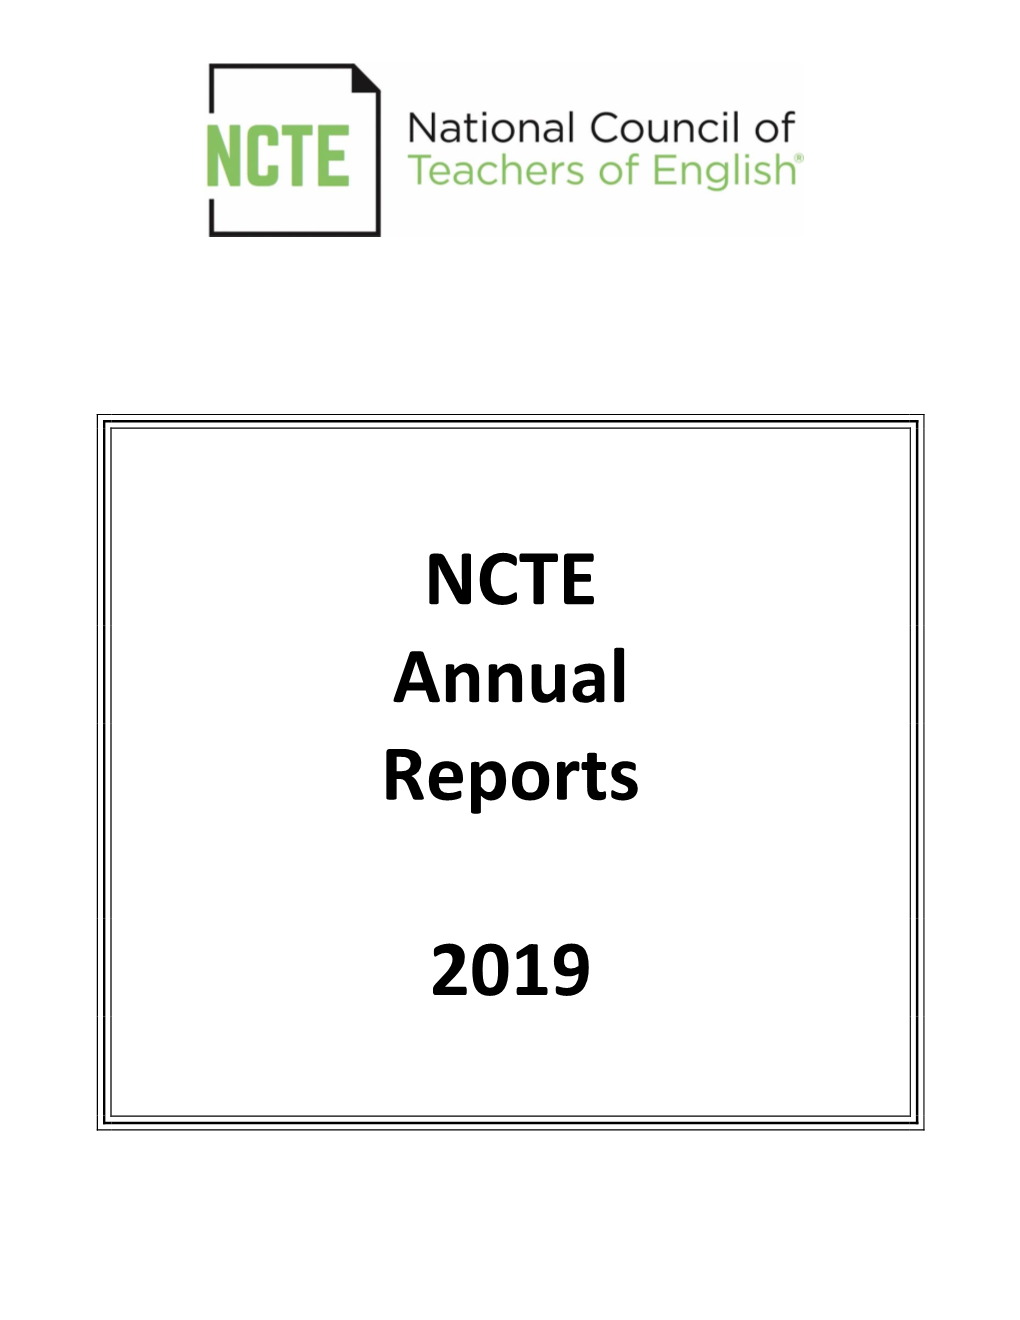 NCTE Annual Reports 2019